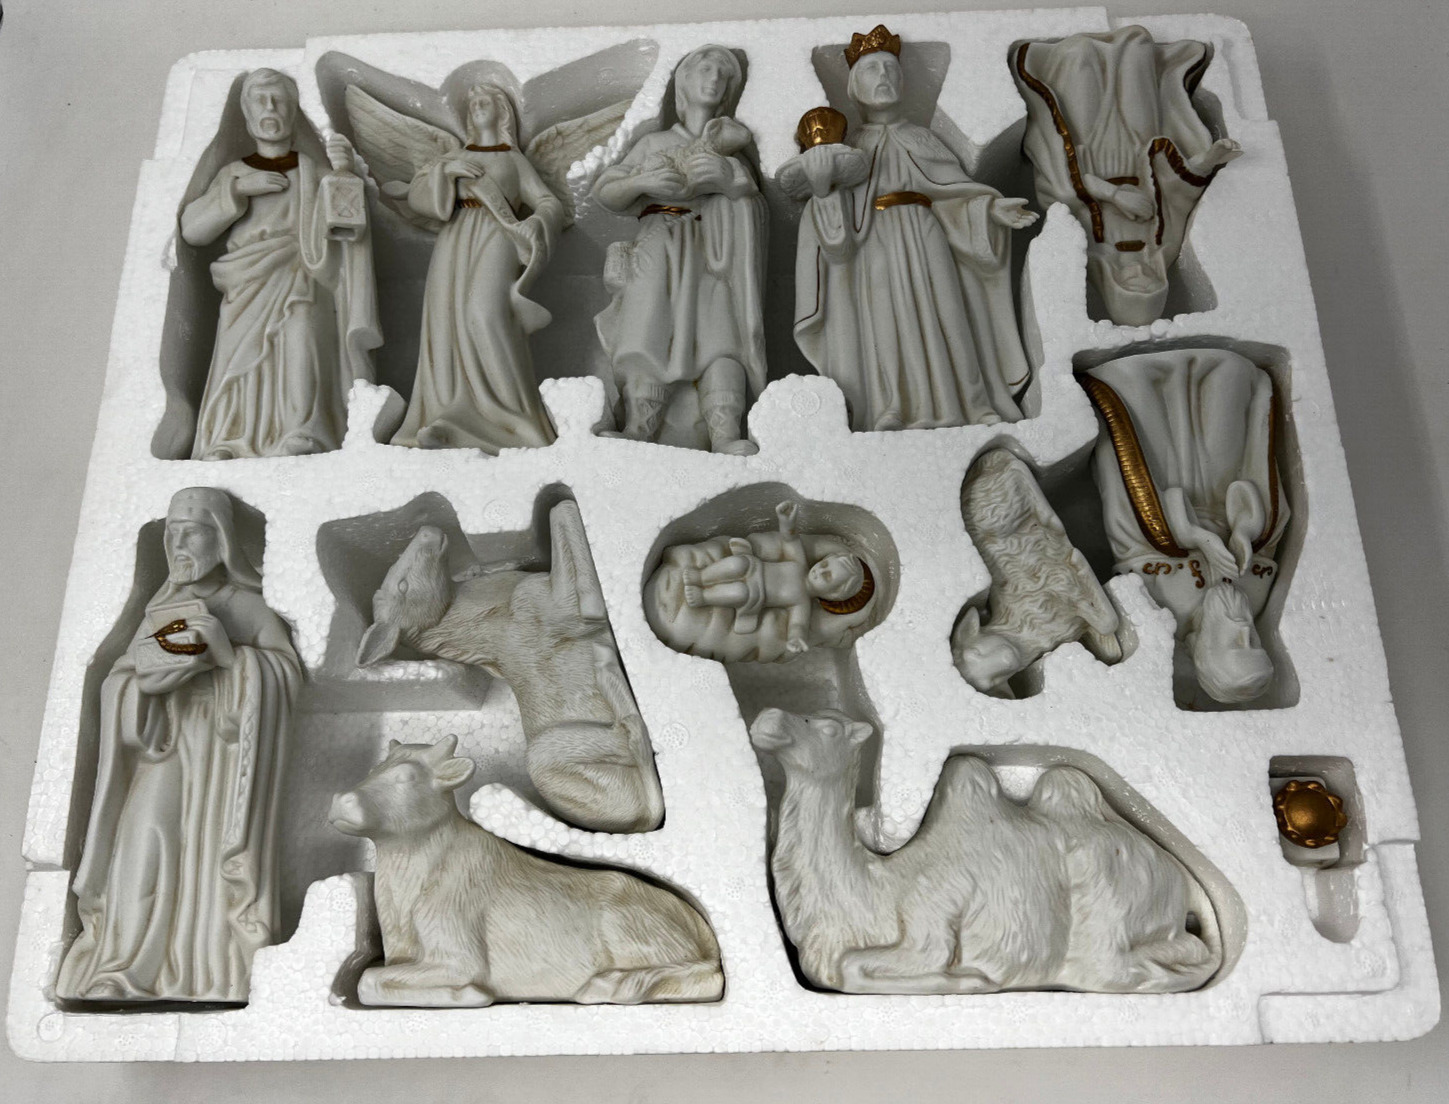 Crown Accents 12 Piece IVORY with GOLD ACCENTS NATIVITY SET